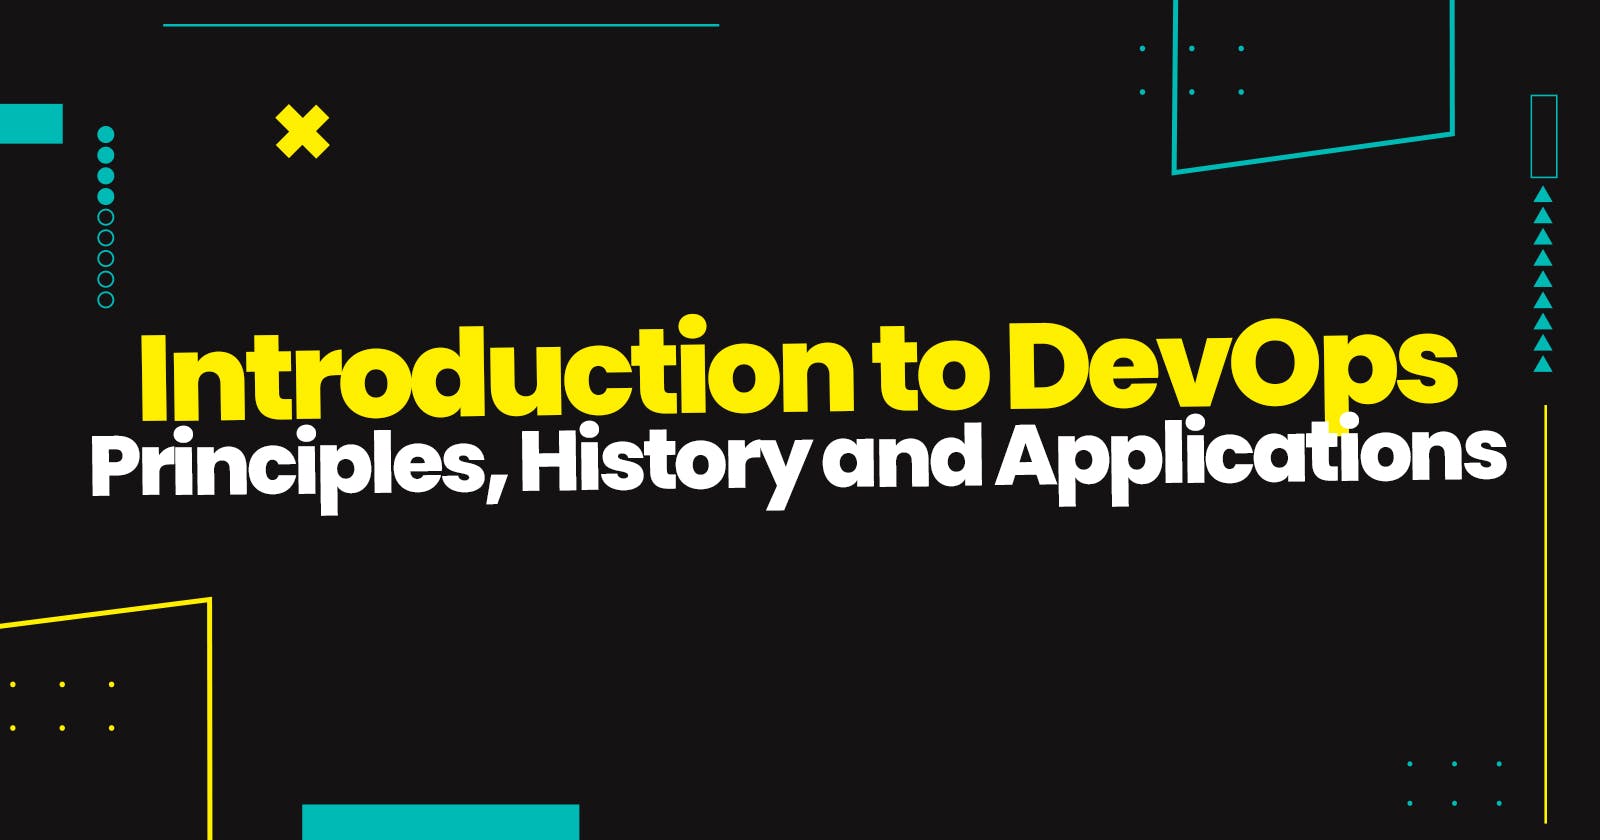 Introduction to DevOps: Principles, History and Applications